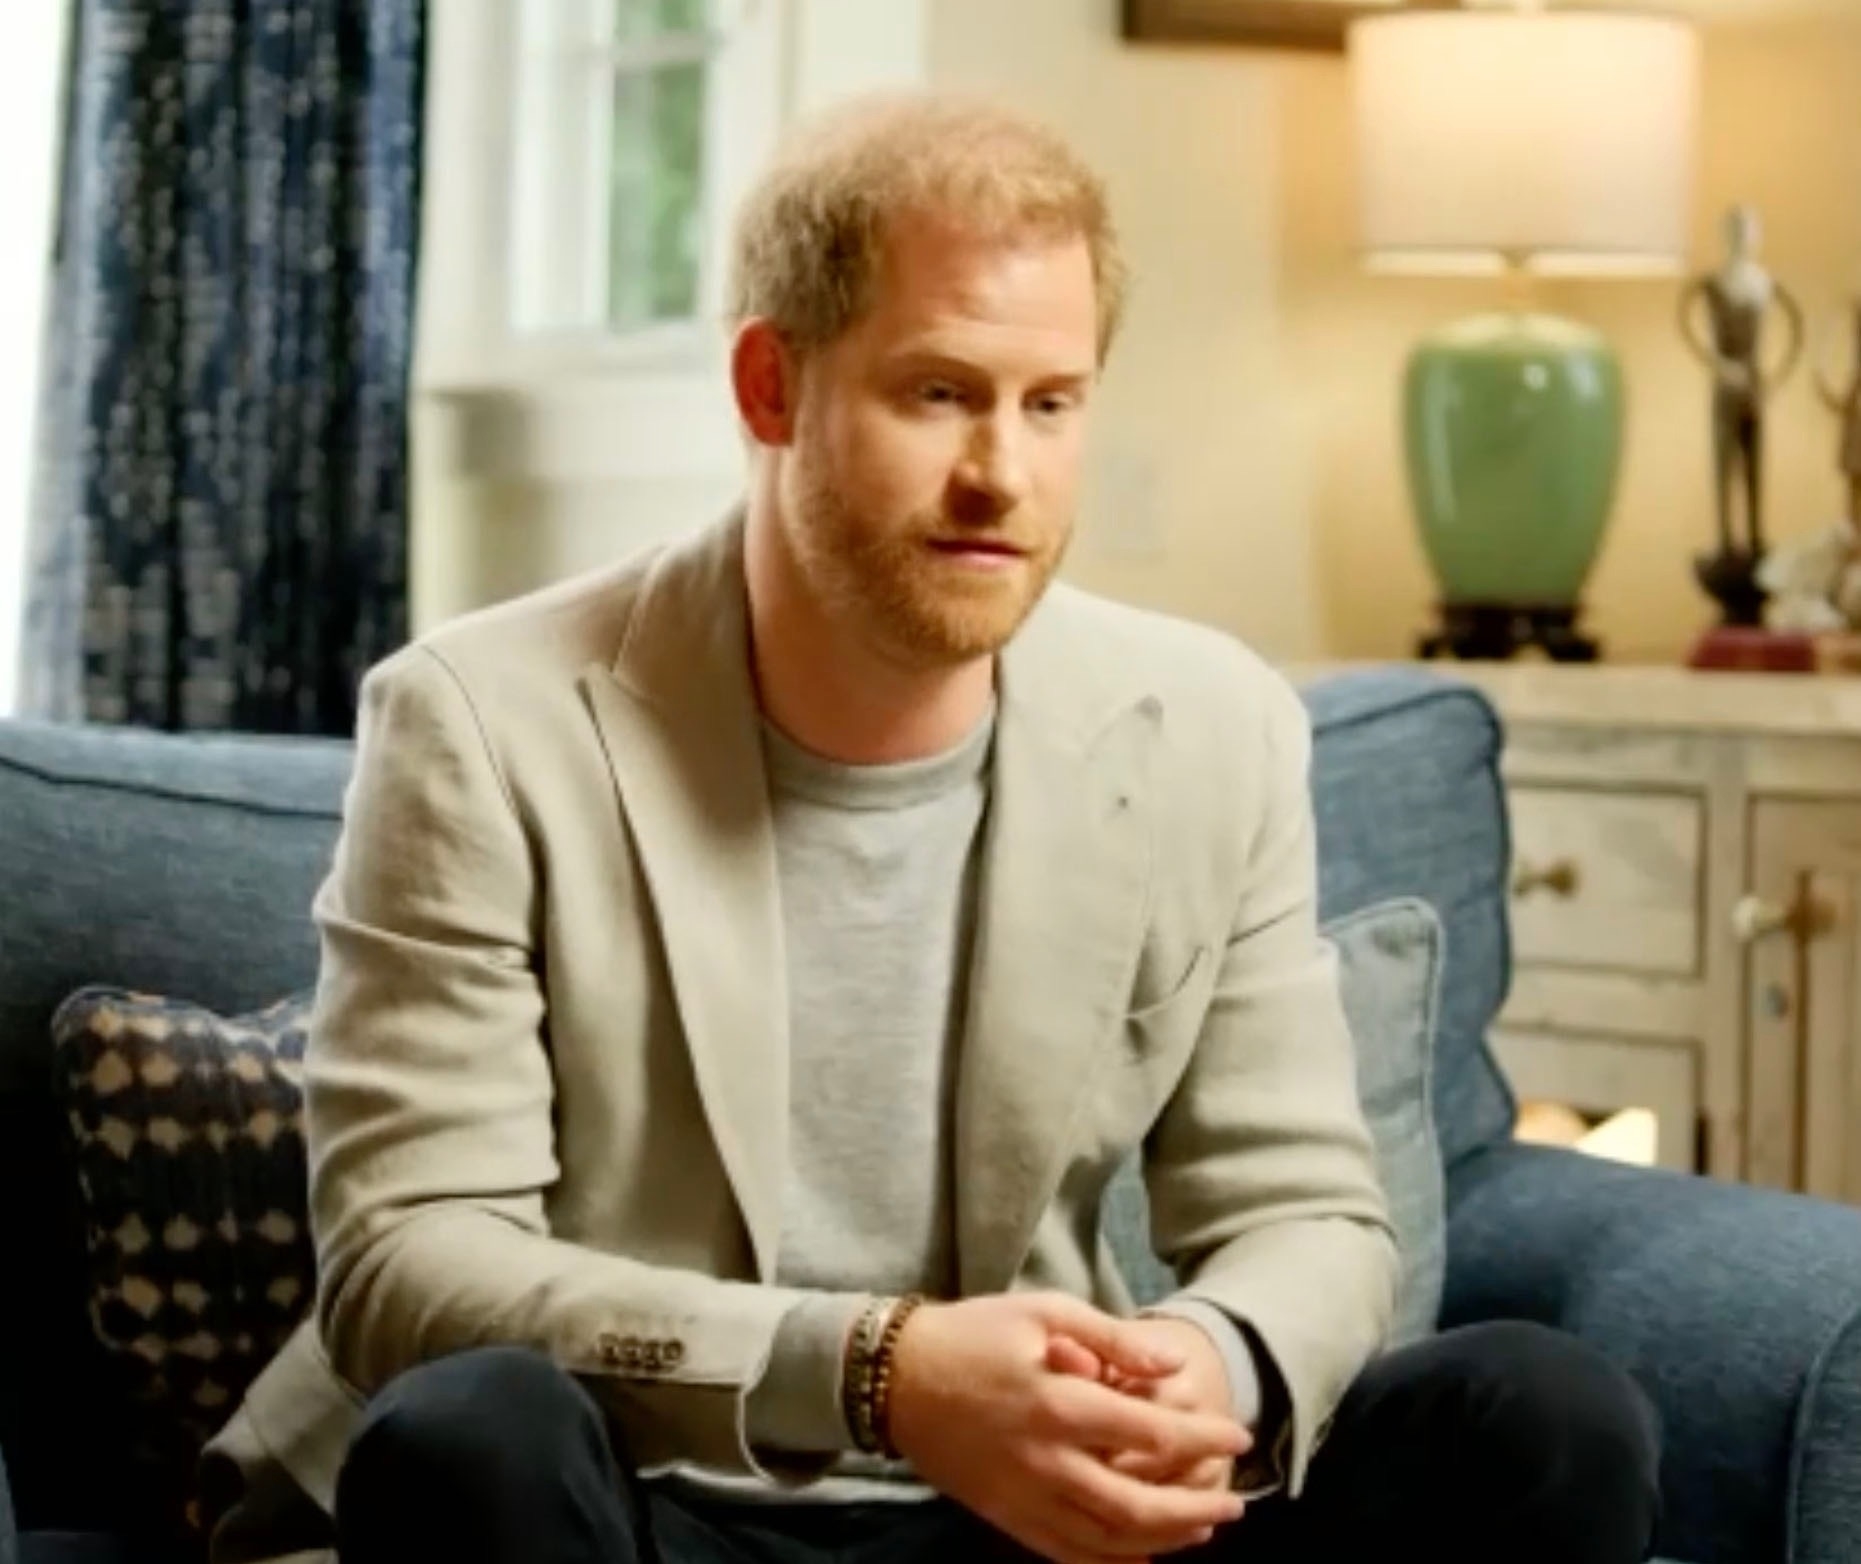 Prince Harry says he’s not a ‘victim’: I ‘never looked for sympathy’